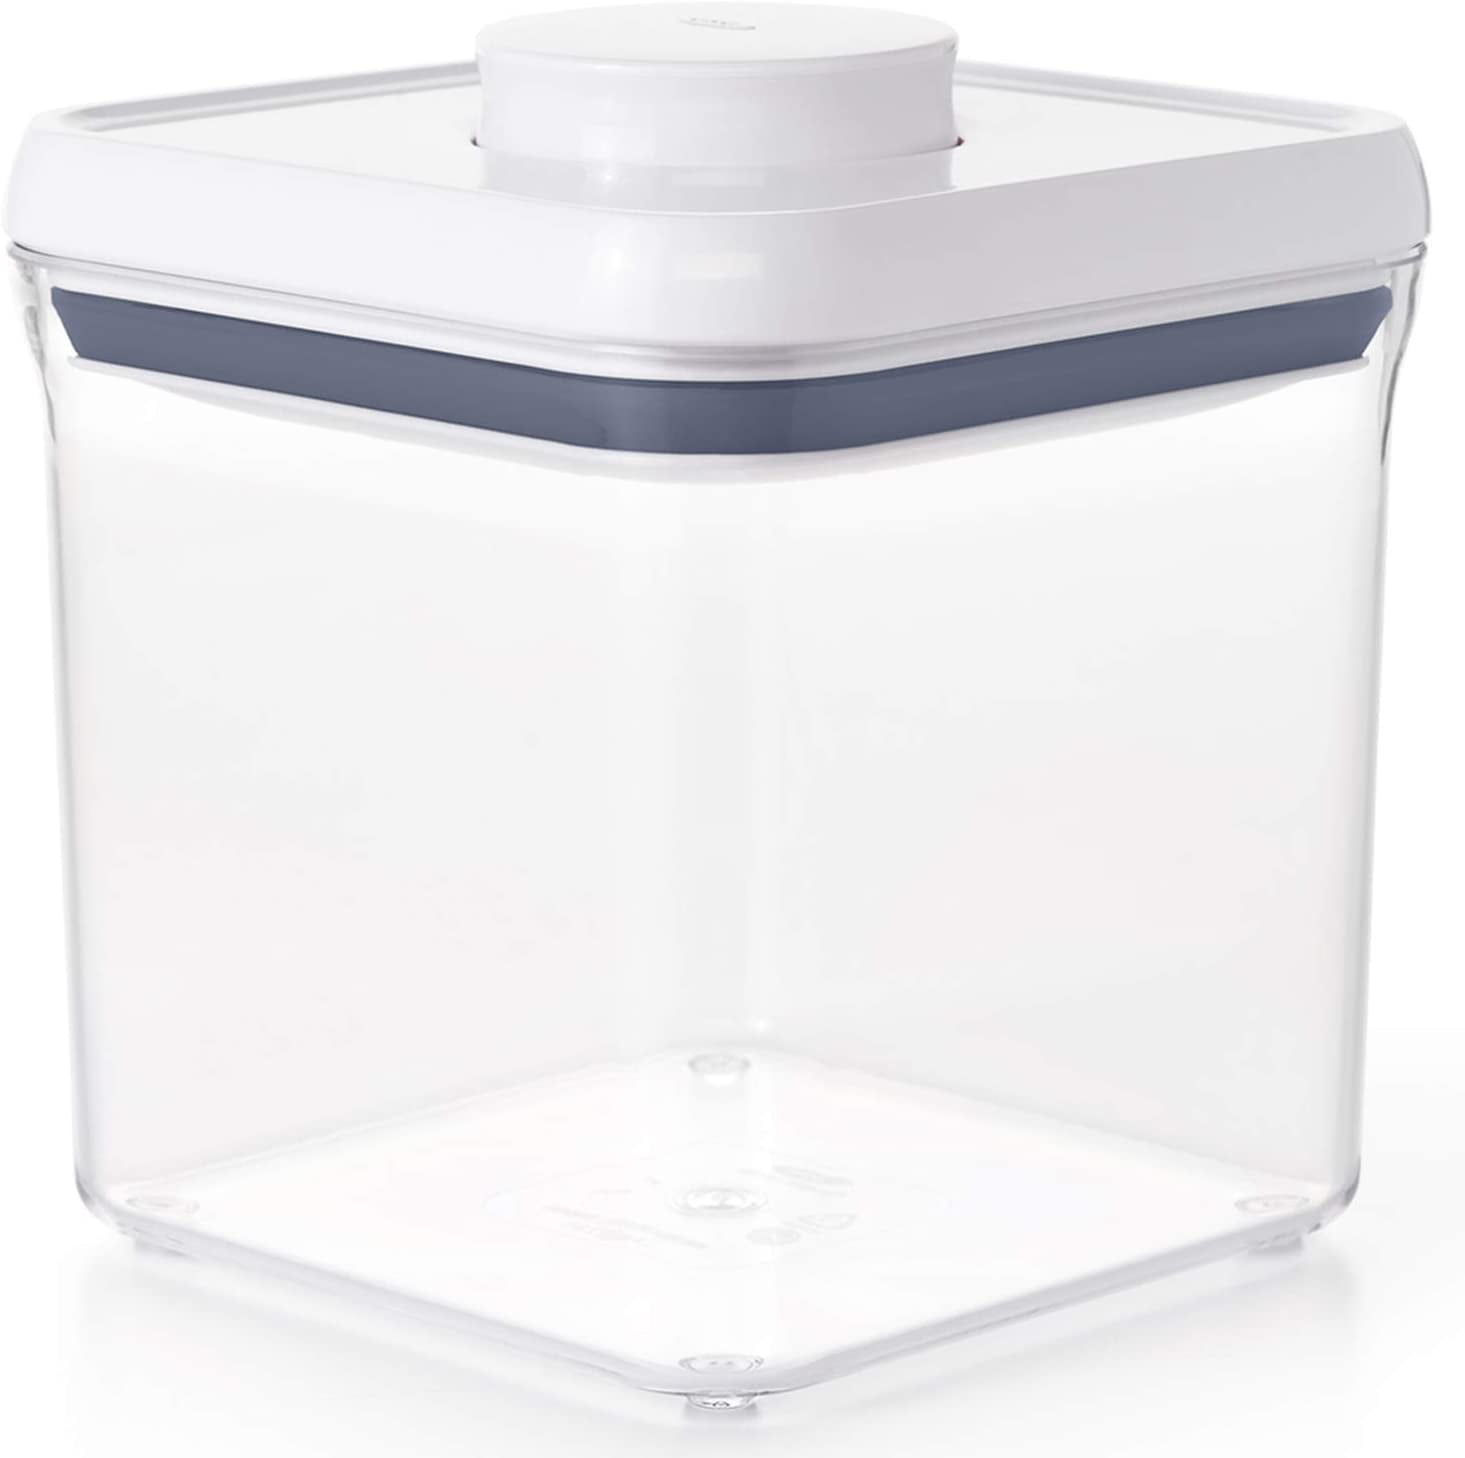 OXO Good Grips Pop Container 4.4-Quart Square Airtight Food Storage for for Flour and More (Set of 4)